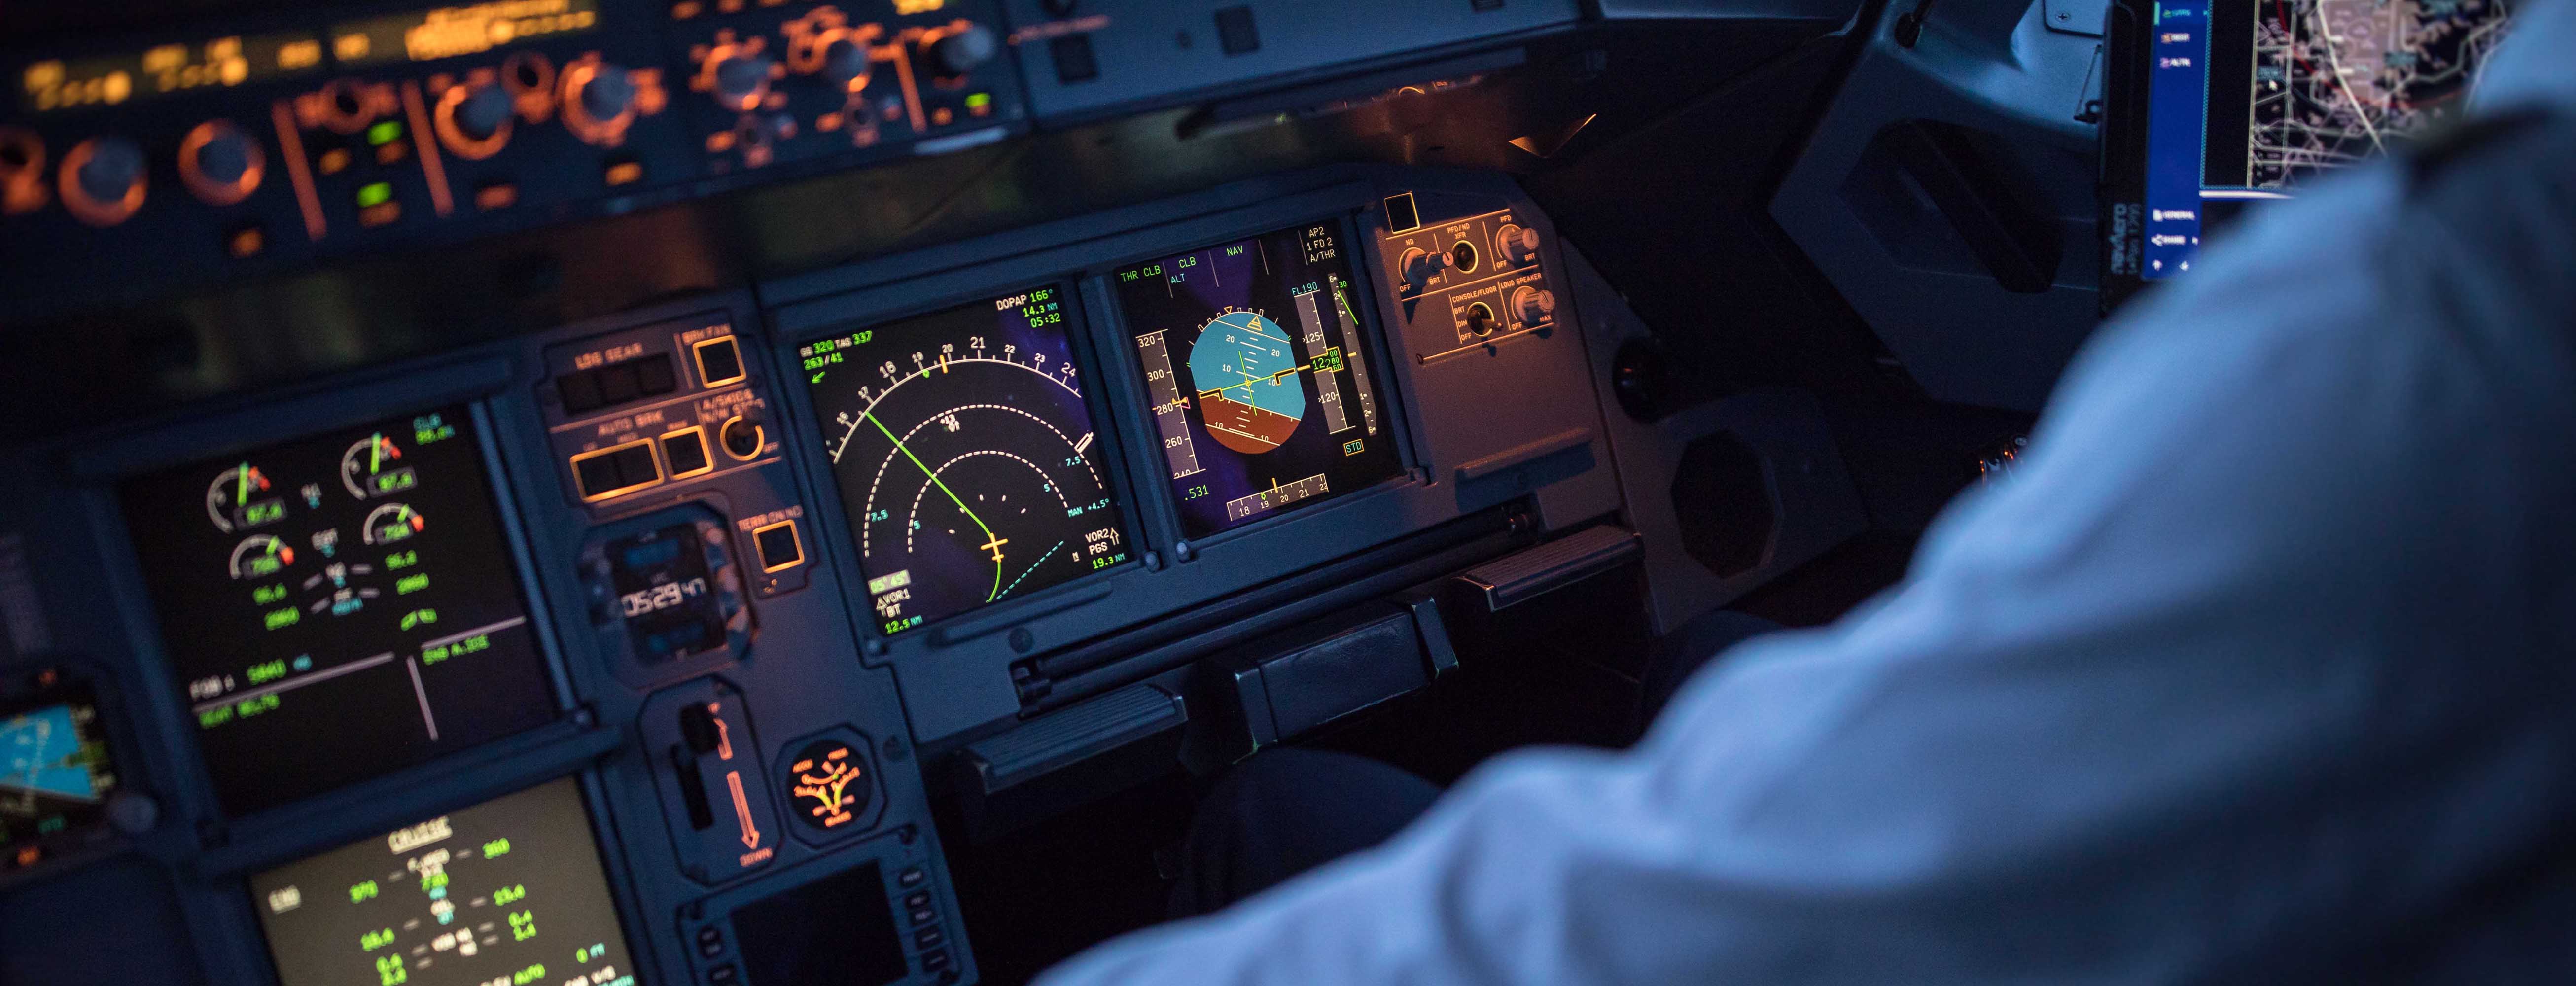 Close up on flight instrument panels in a commercial aircraft